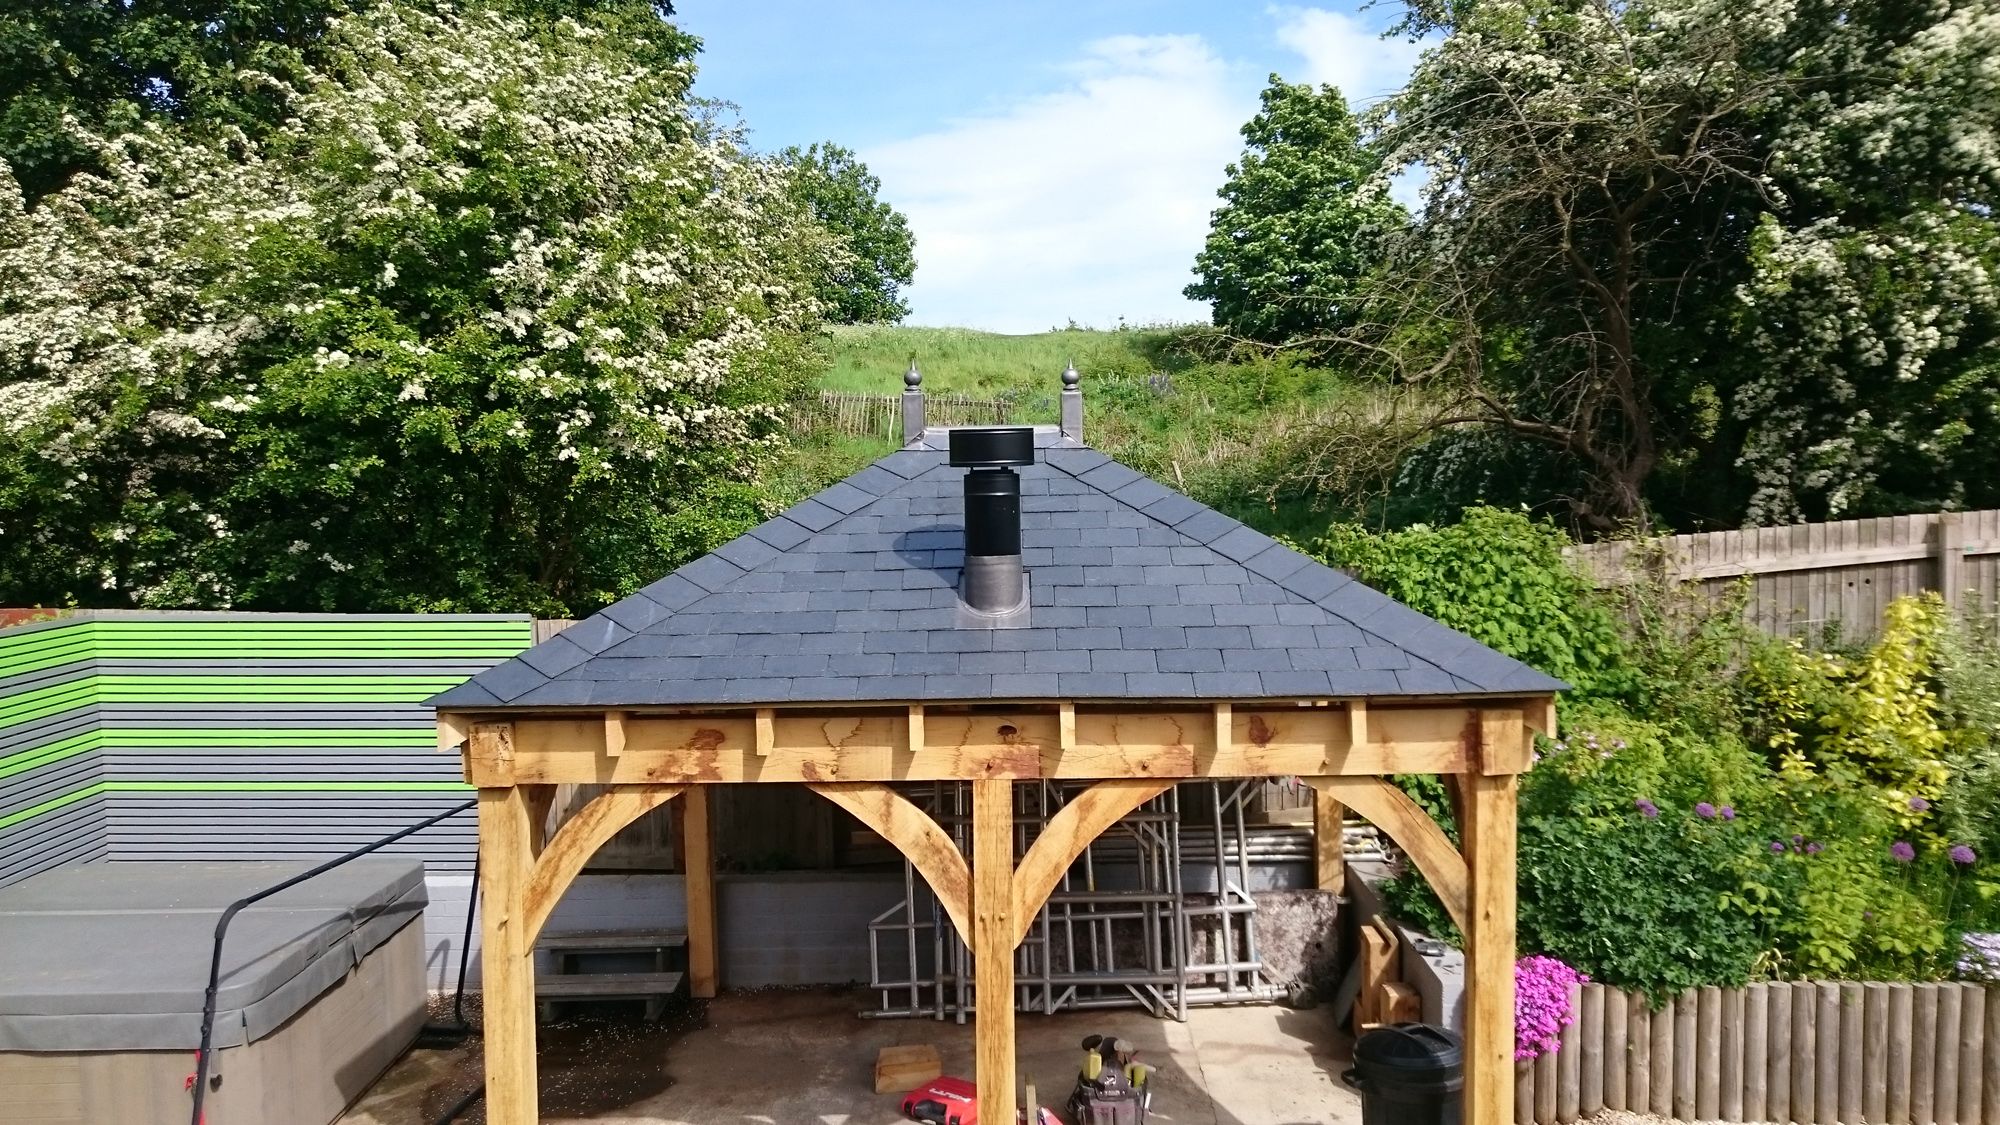 Double-lap Slating – Timby Traditional Roofing, Tait Gazebo, Gainsborough